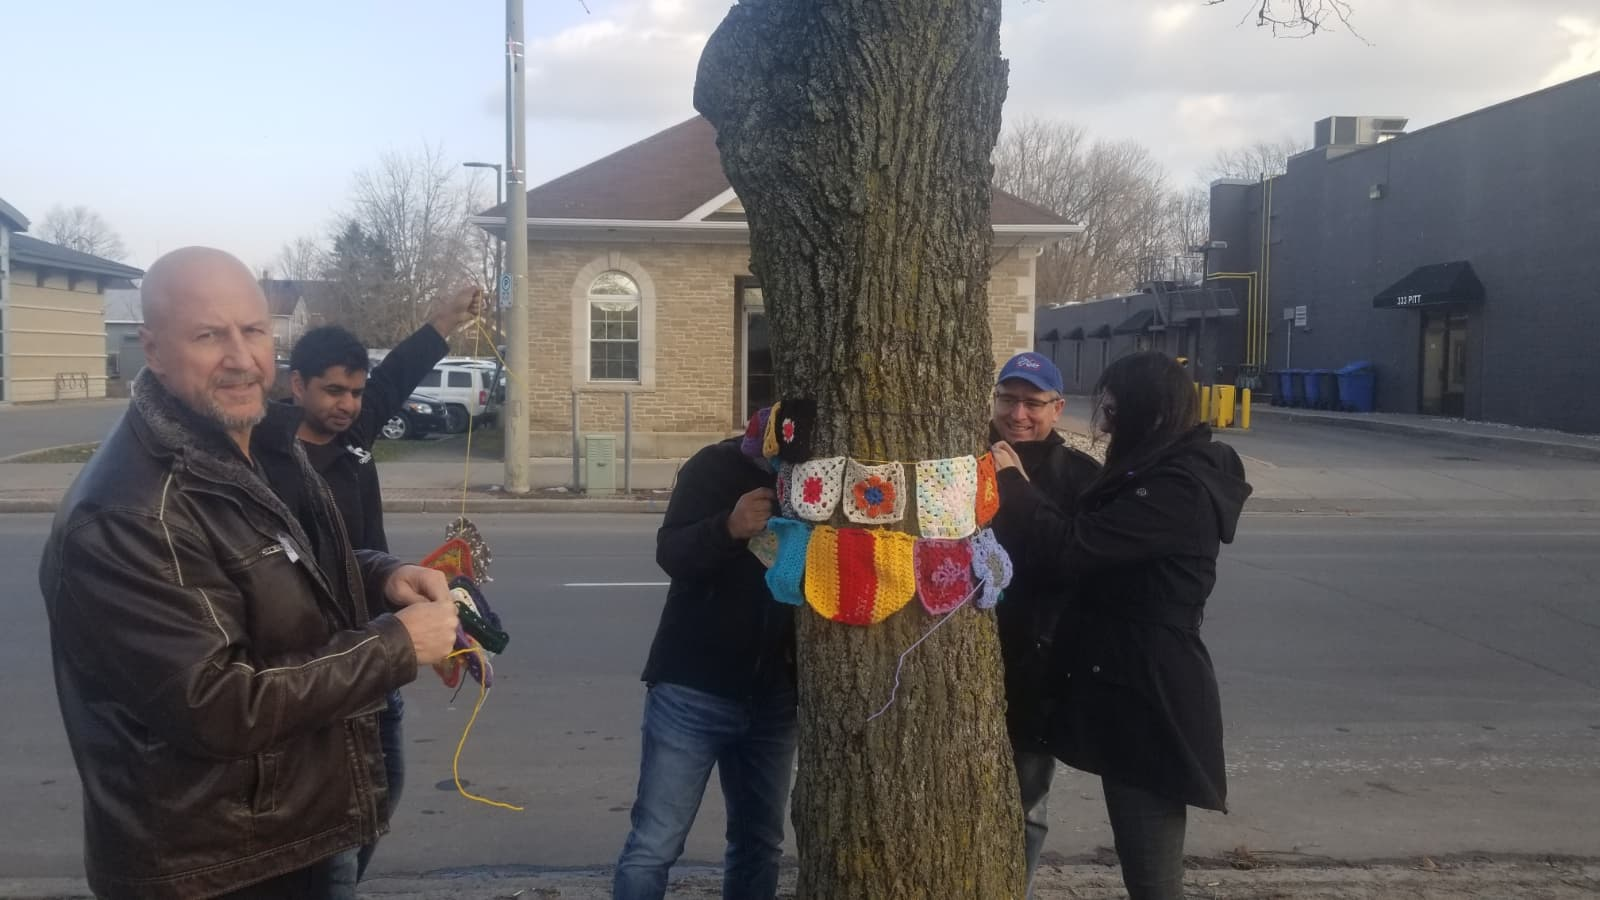 Tree cozies memorialize victims of violence